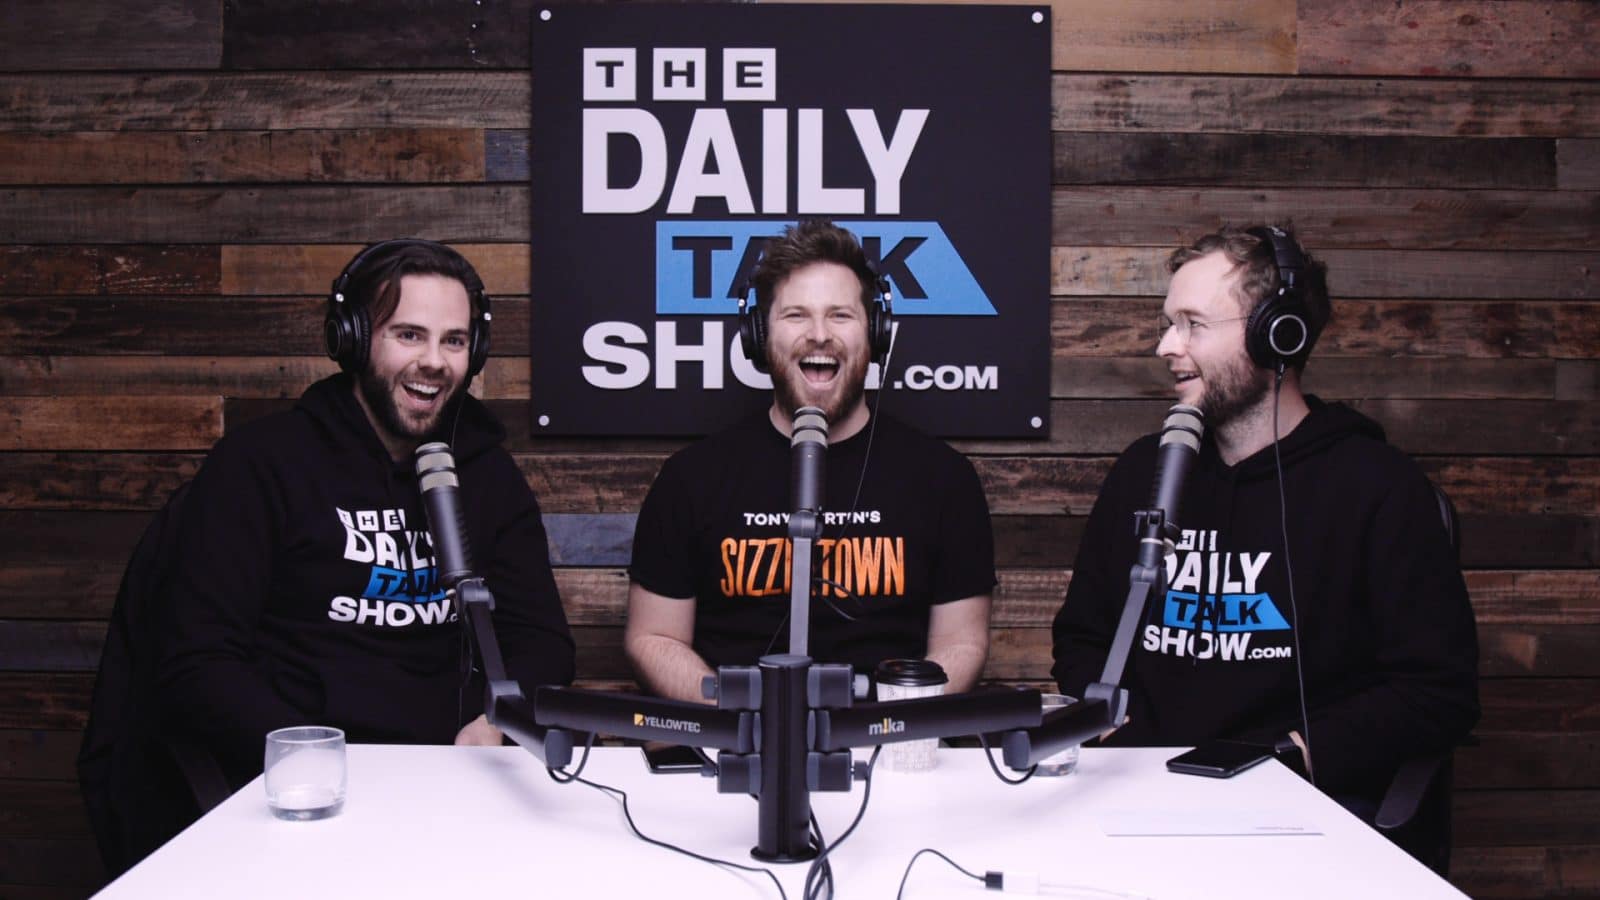 The-Daily-Talk-Show-441